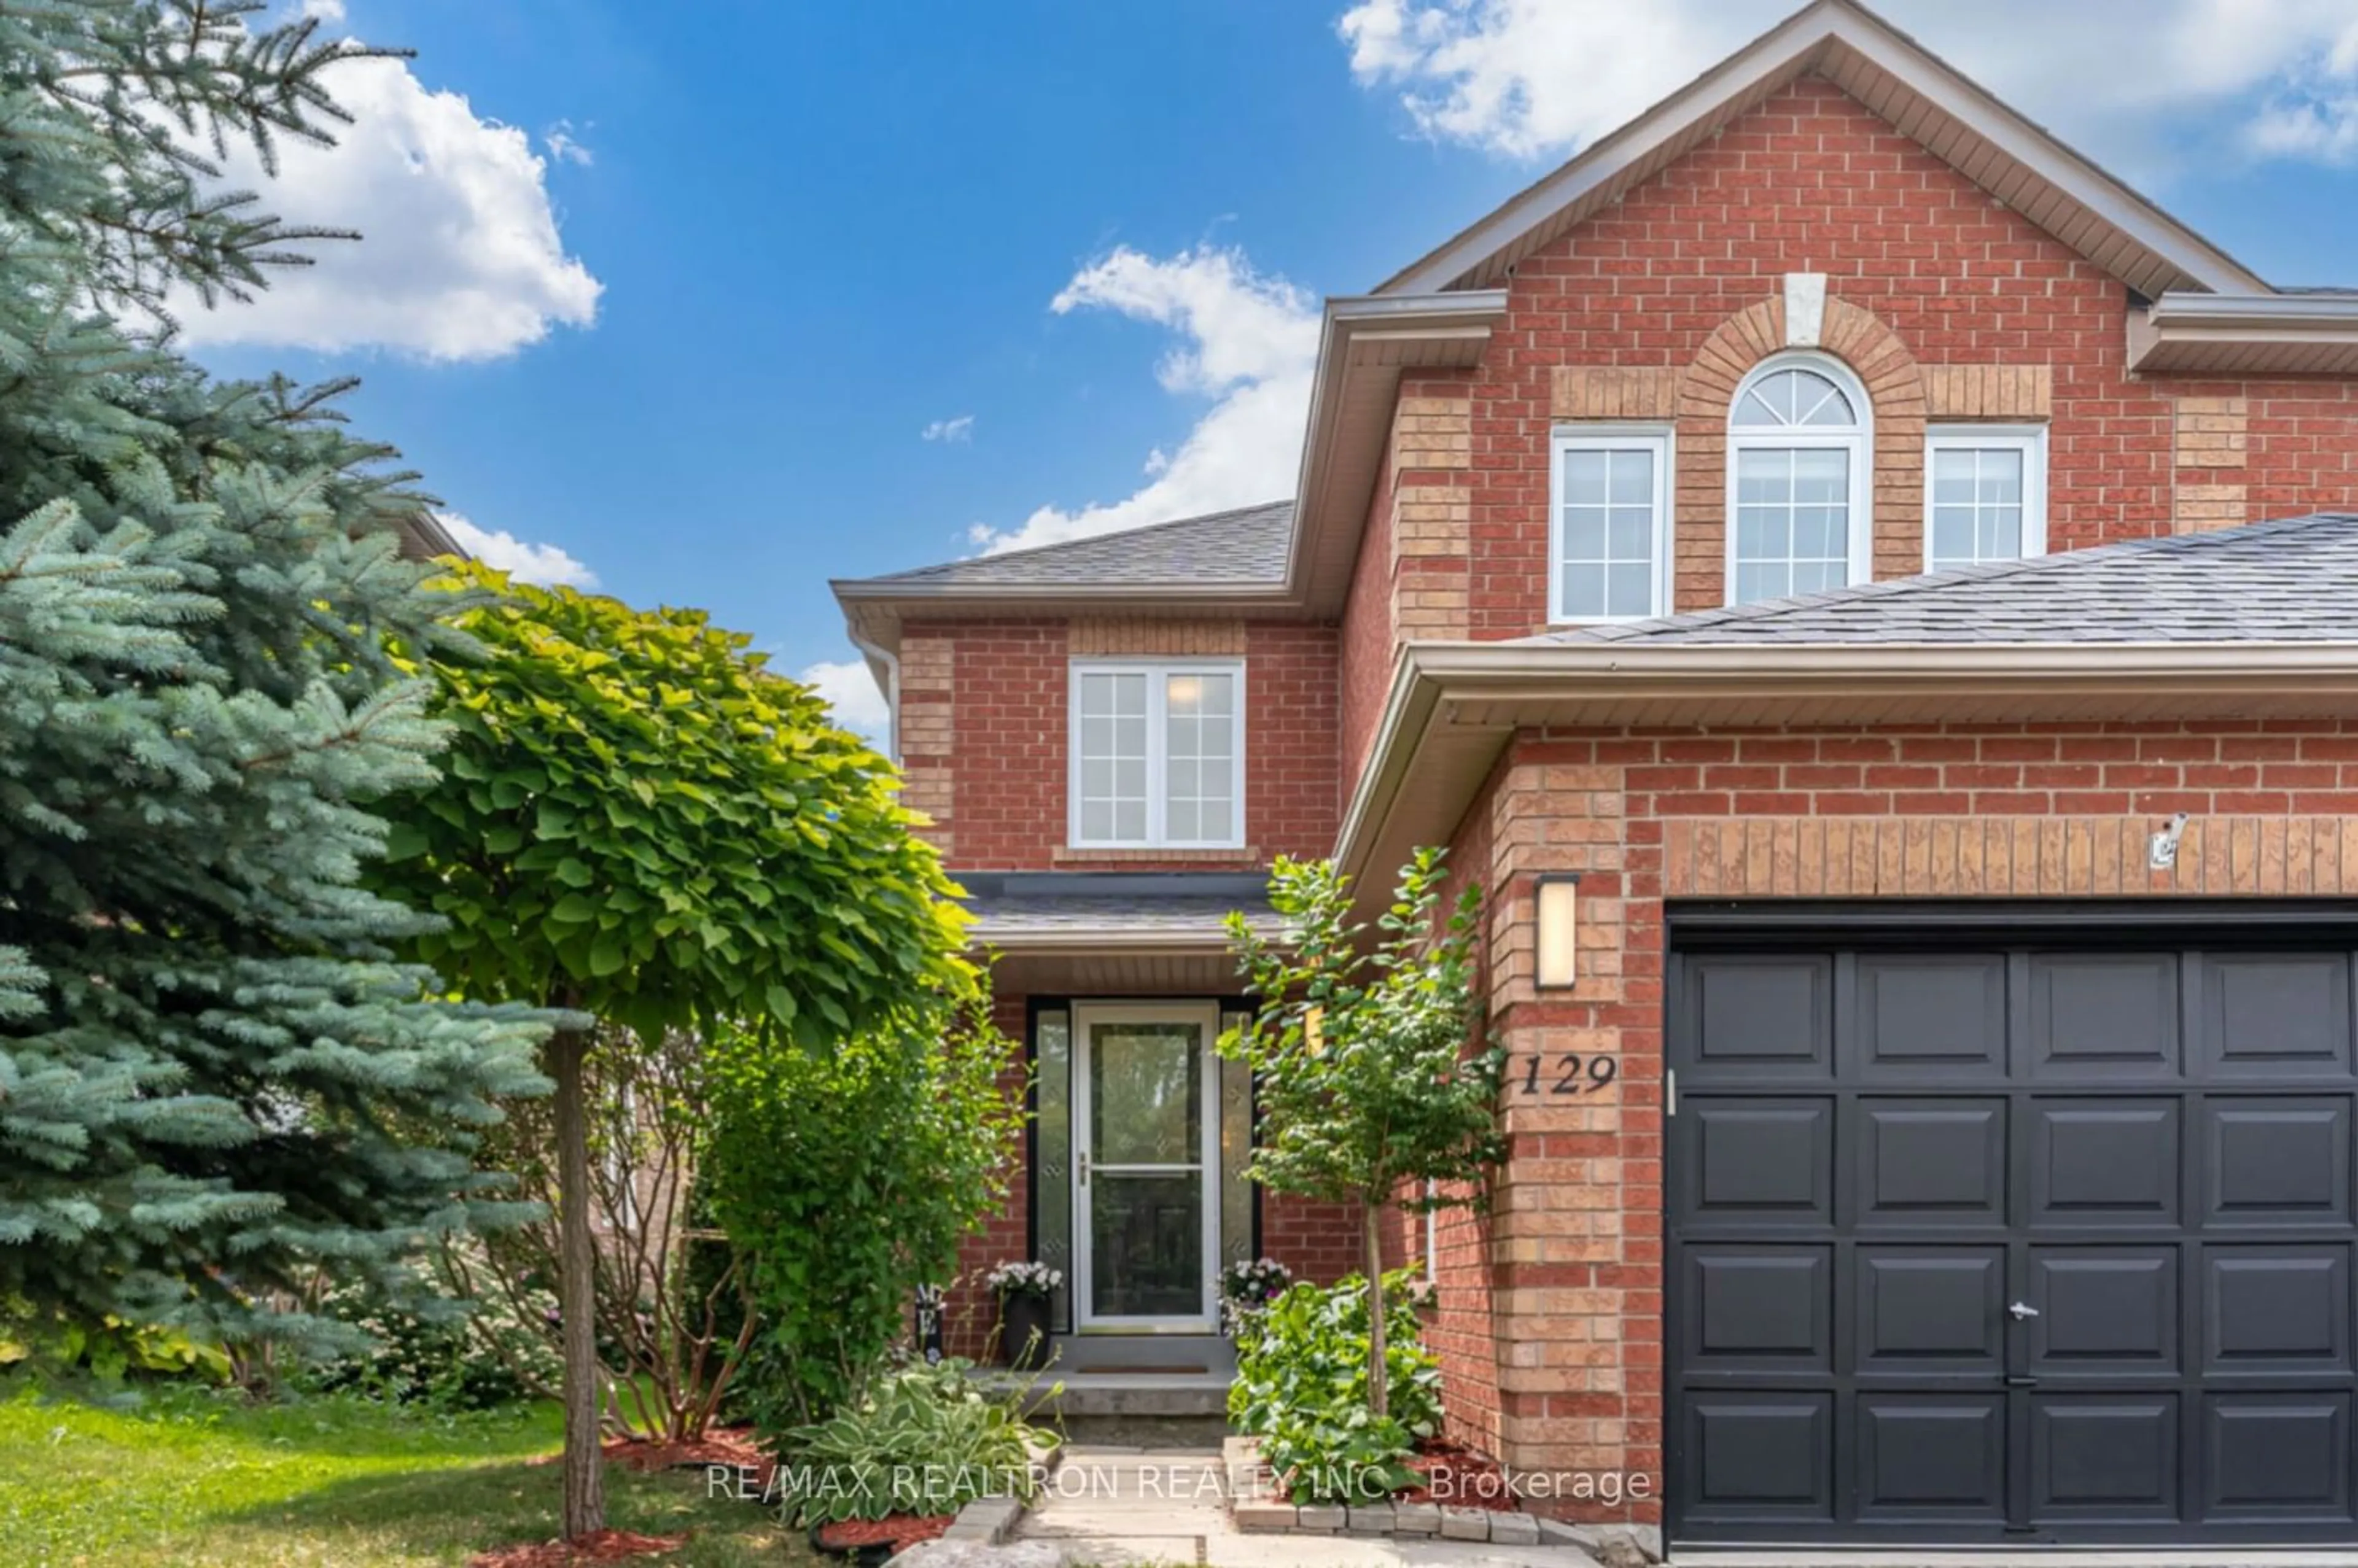 Home with brick exterior material for 129 Mowat Cres, Halton Hills Ontario L7G 6C7